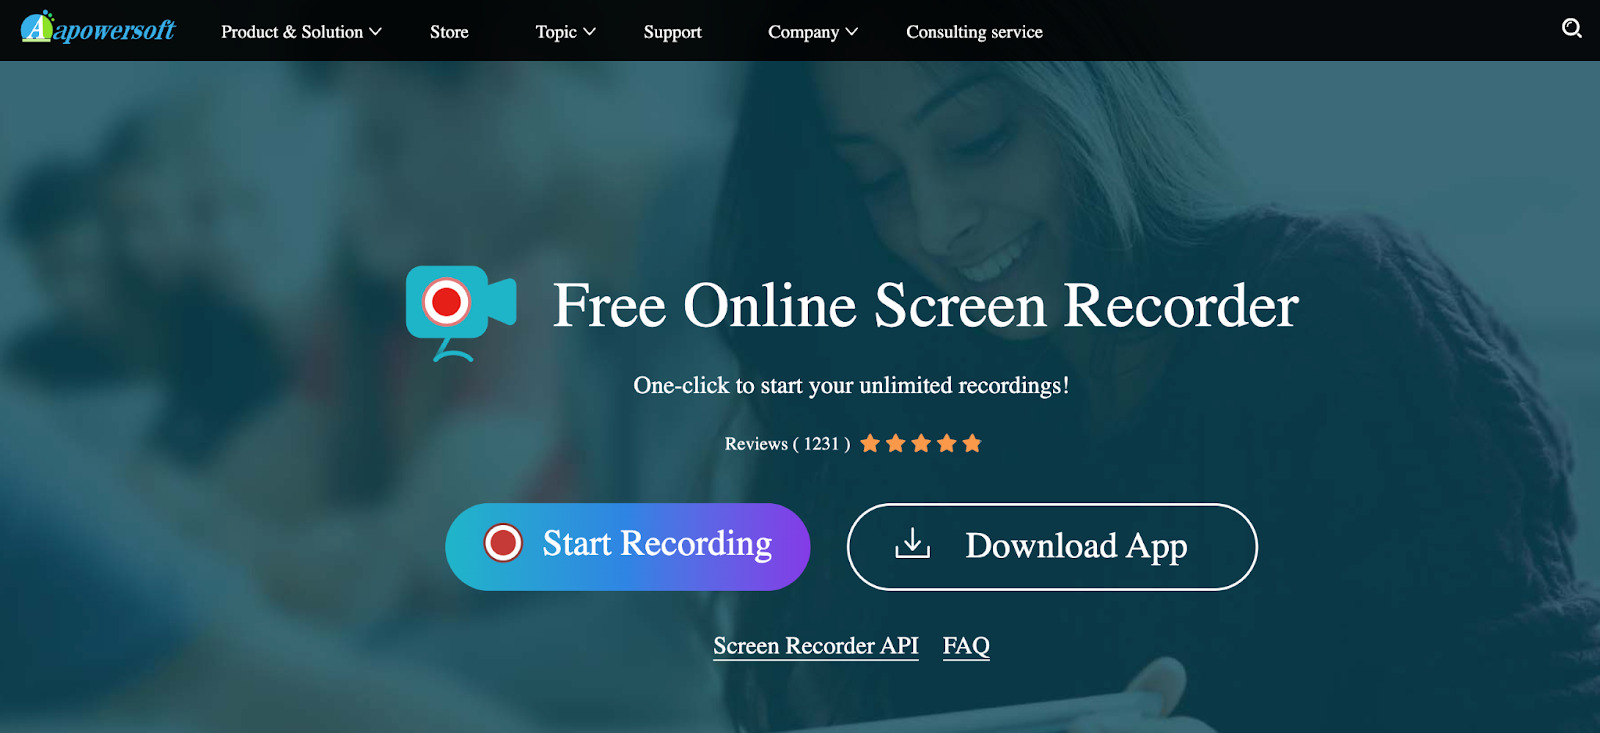 Best Free Screen Recorders for Mac and Windows: Apowersoft